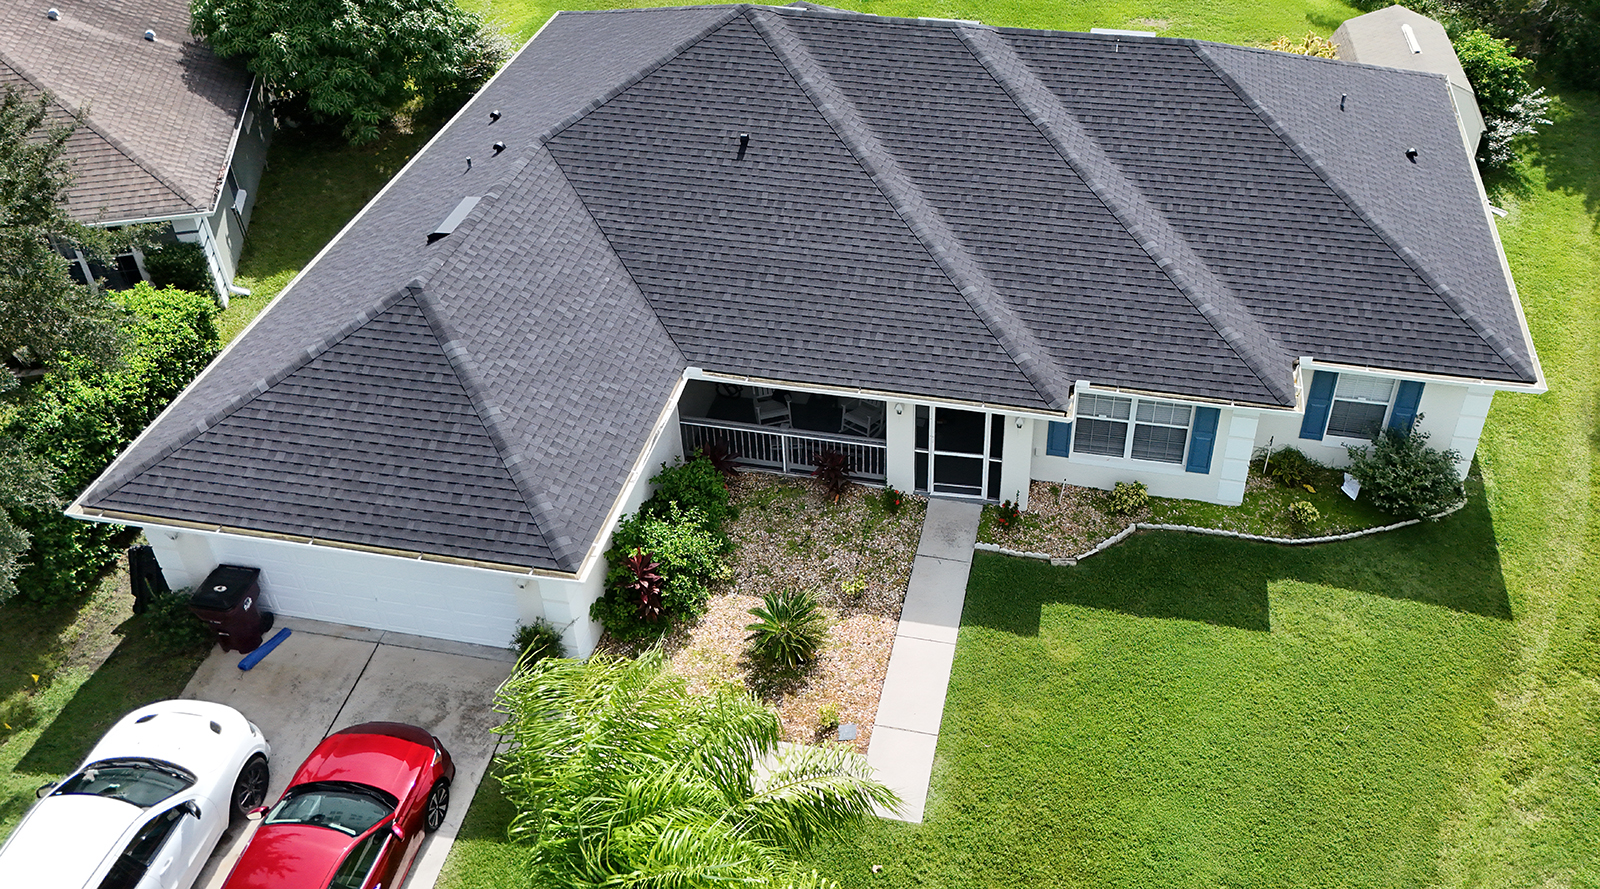 drone shot of a single family residential home with a gray shingle roof